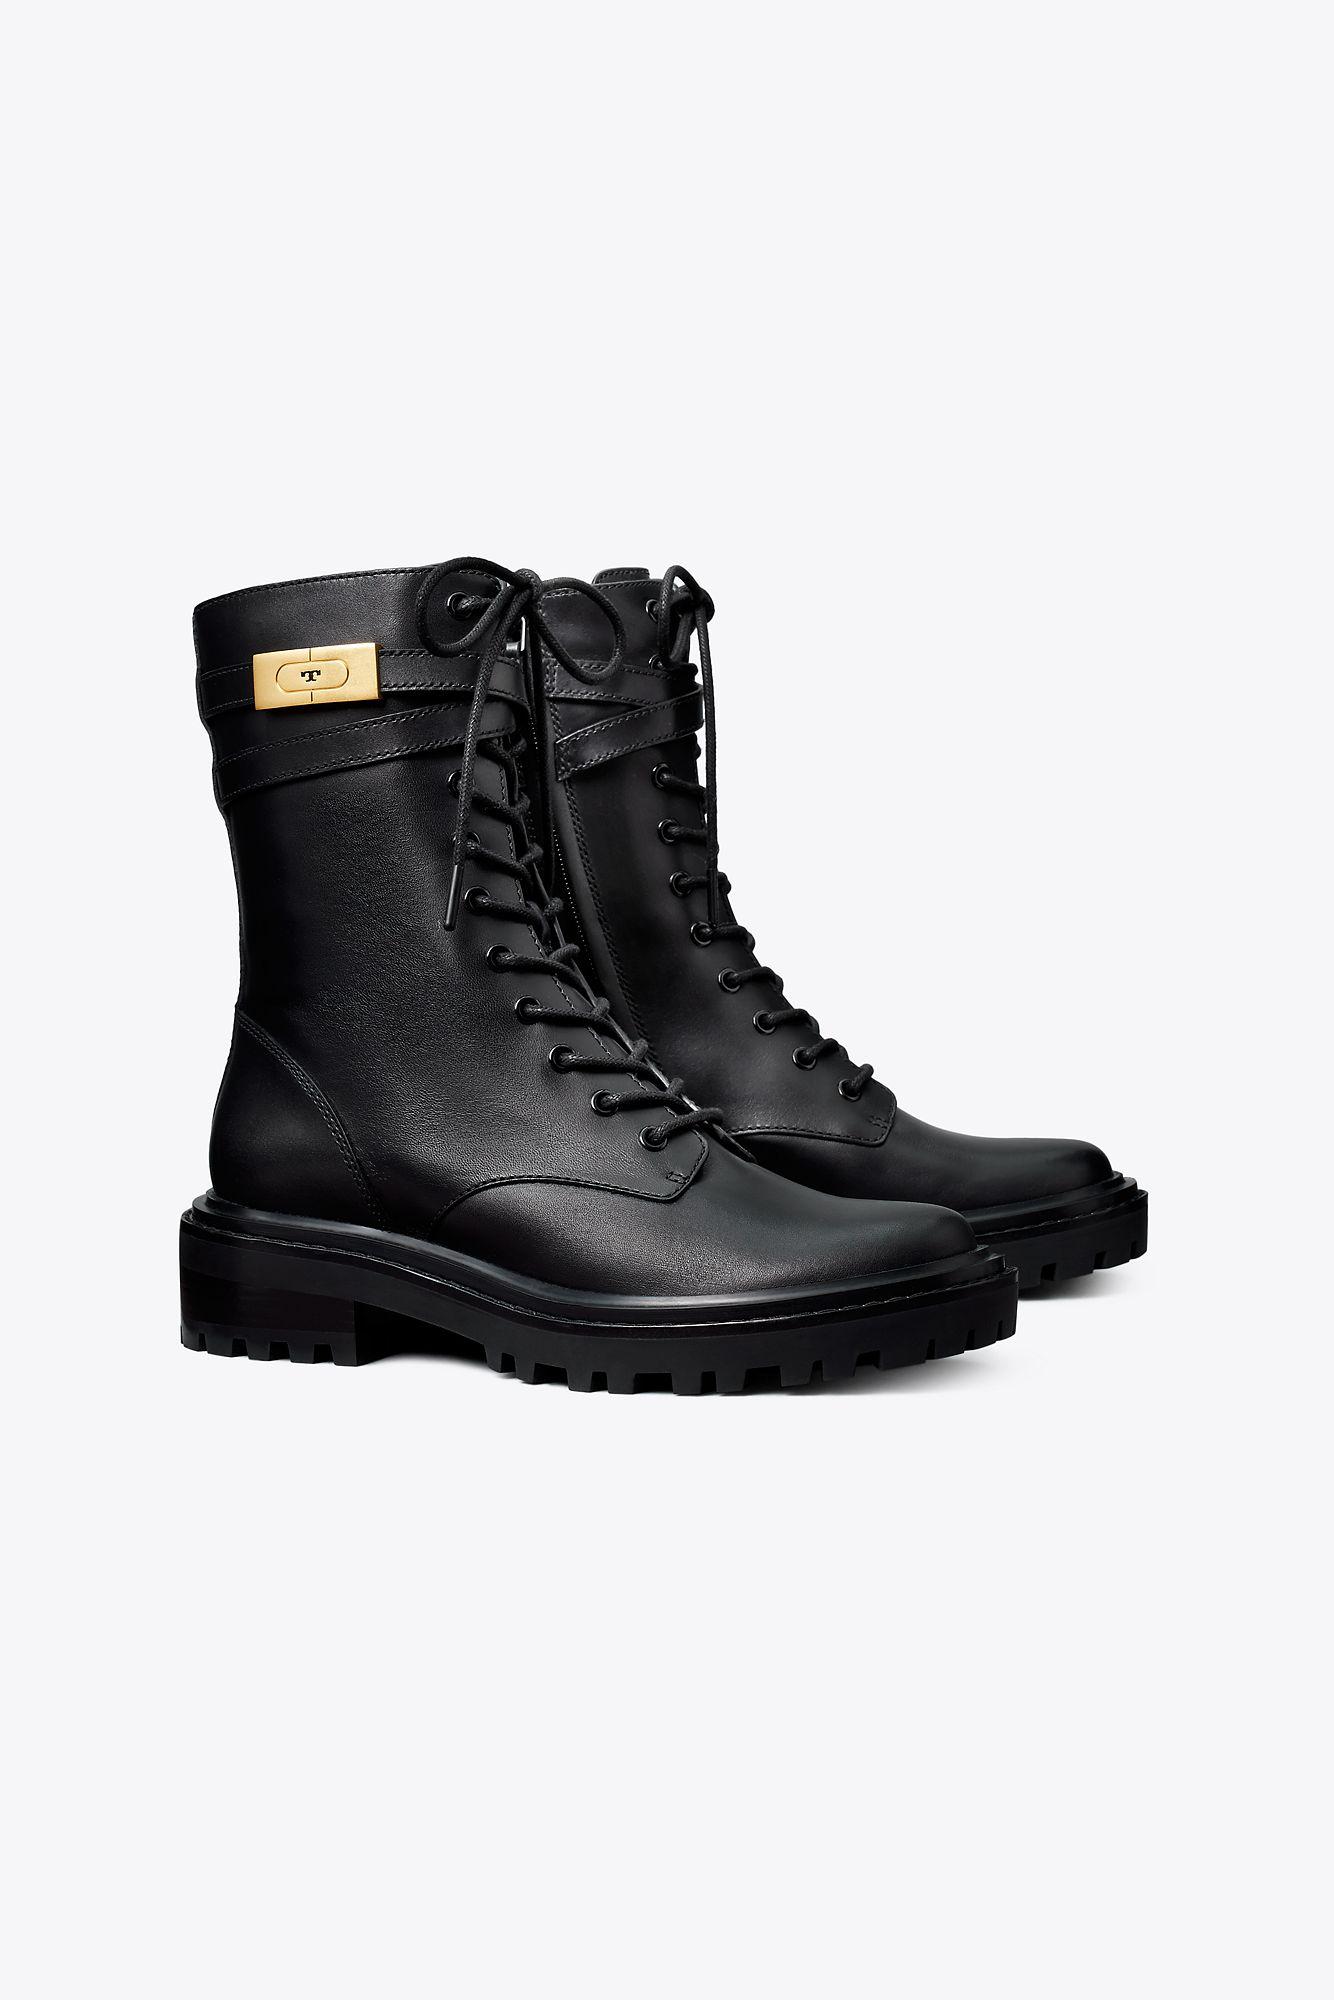 TORY BURCH BROOME BLACK COMBAT BOOTS Size: 6 